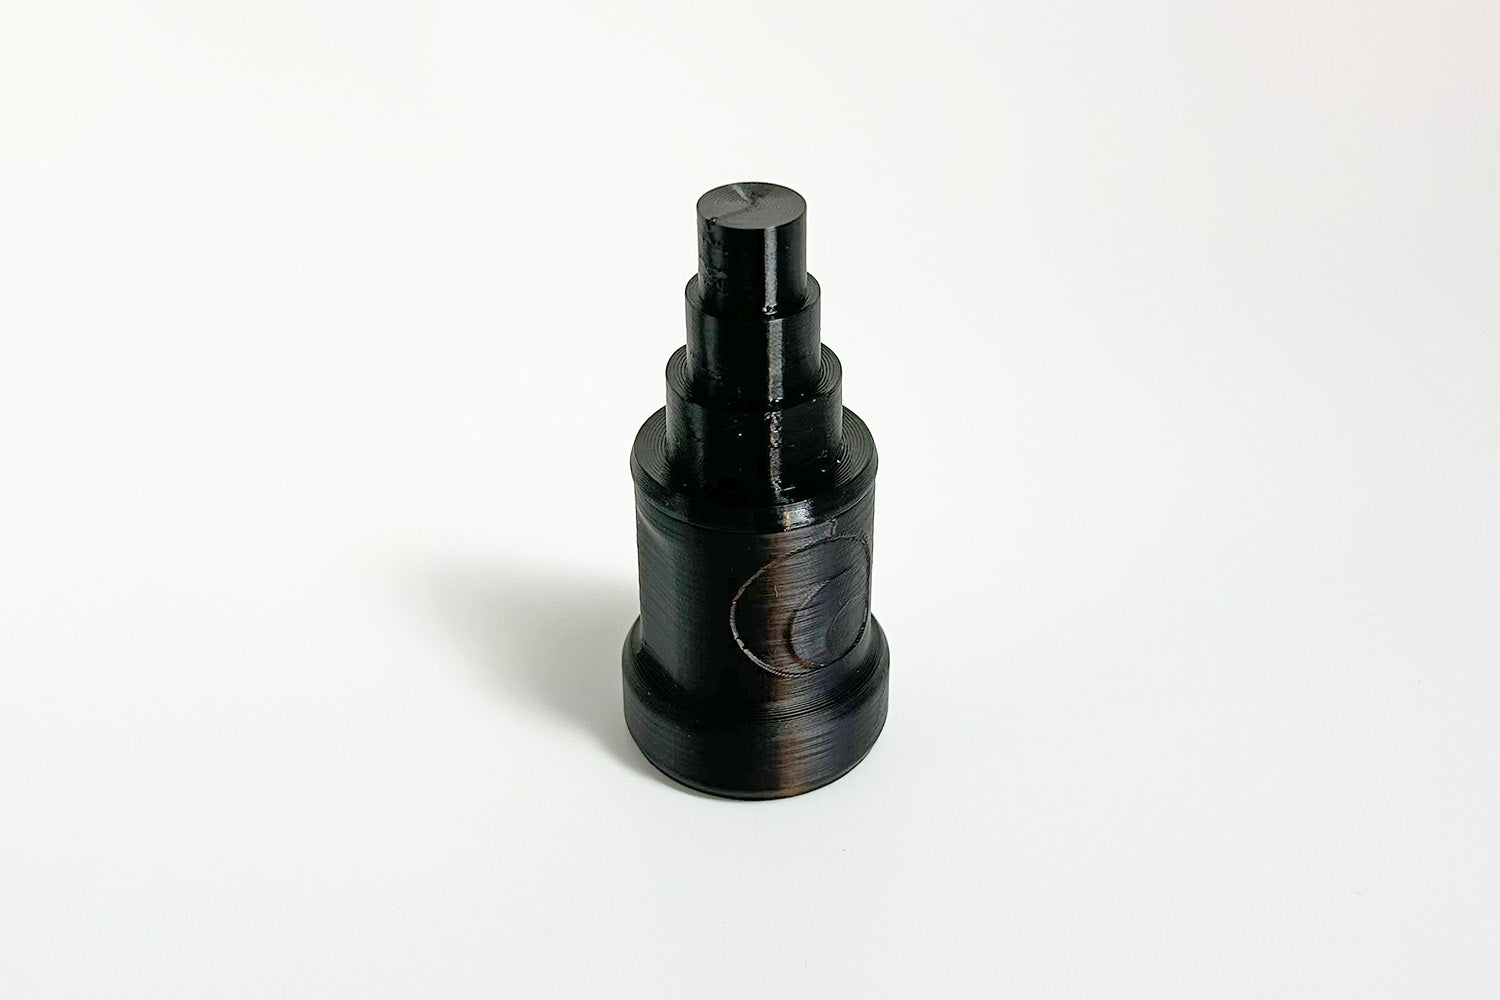 Our 3d printed Wheel Hub Axle Removal Tool is made to fit 12, 15 and 20 mm axles.